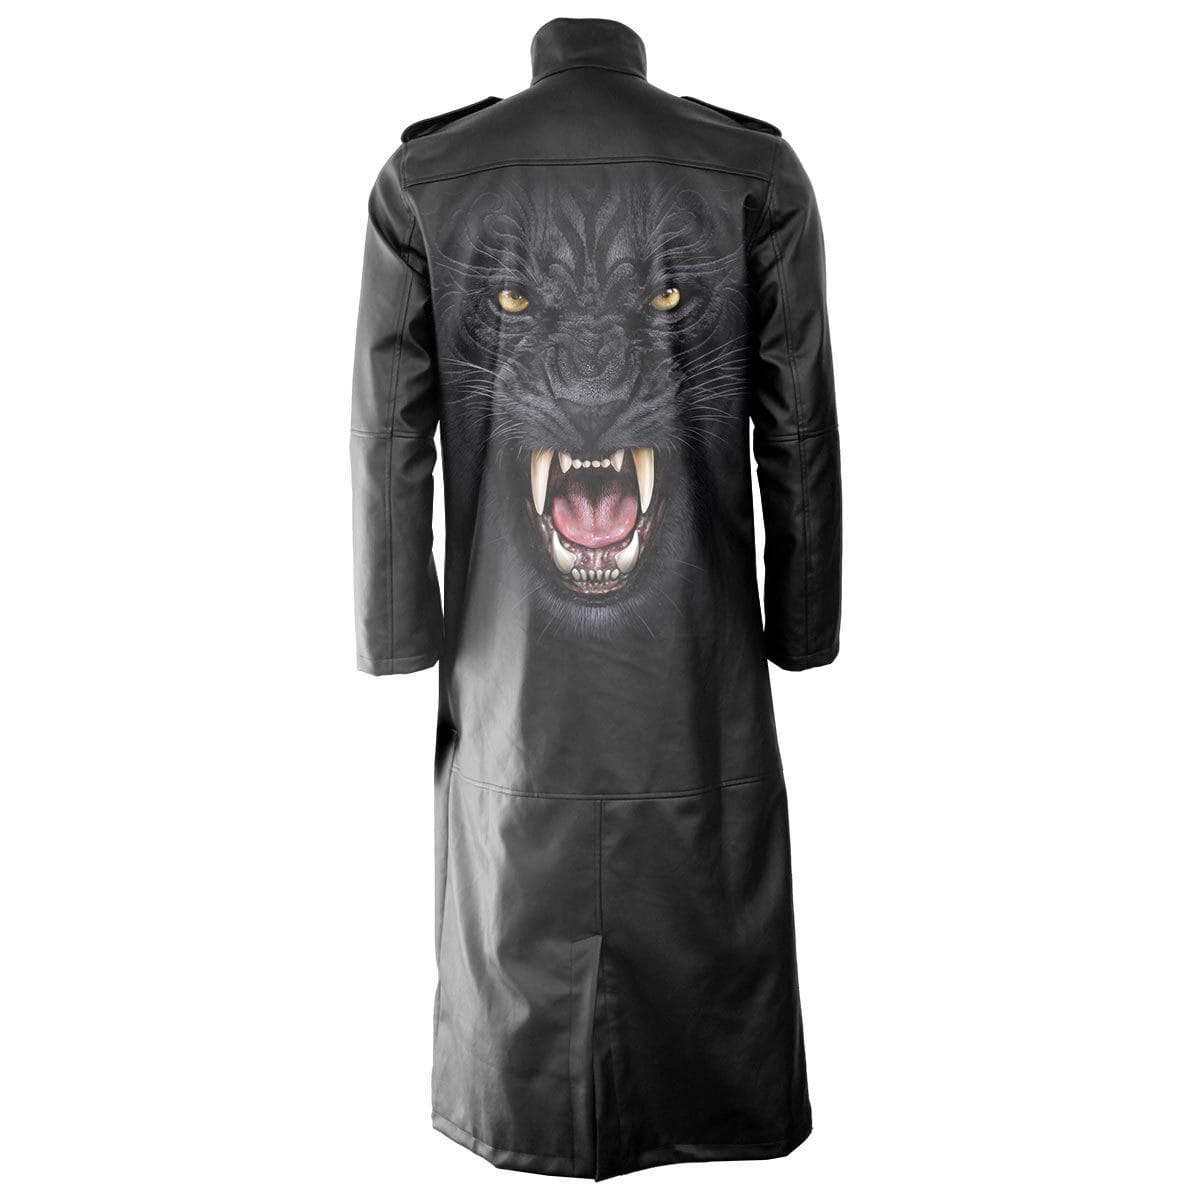 TRIBAL PANTHER - Gothic Trench Coat PU-Leather with Full Zip - Spiral USA